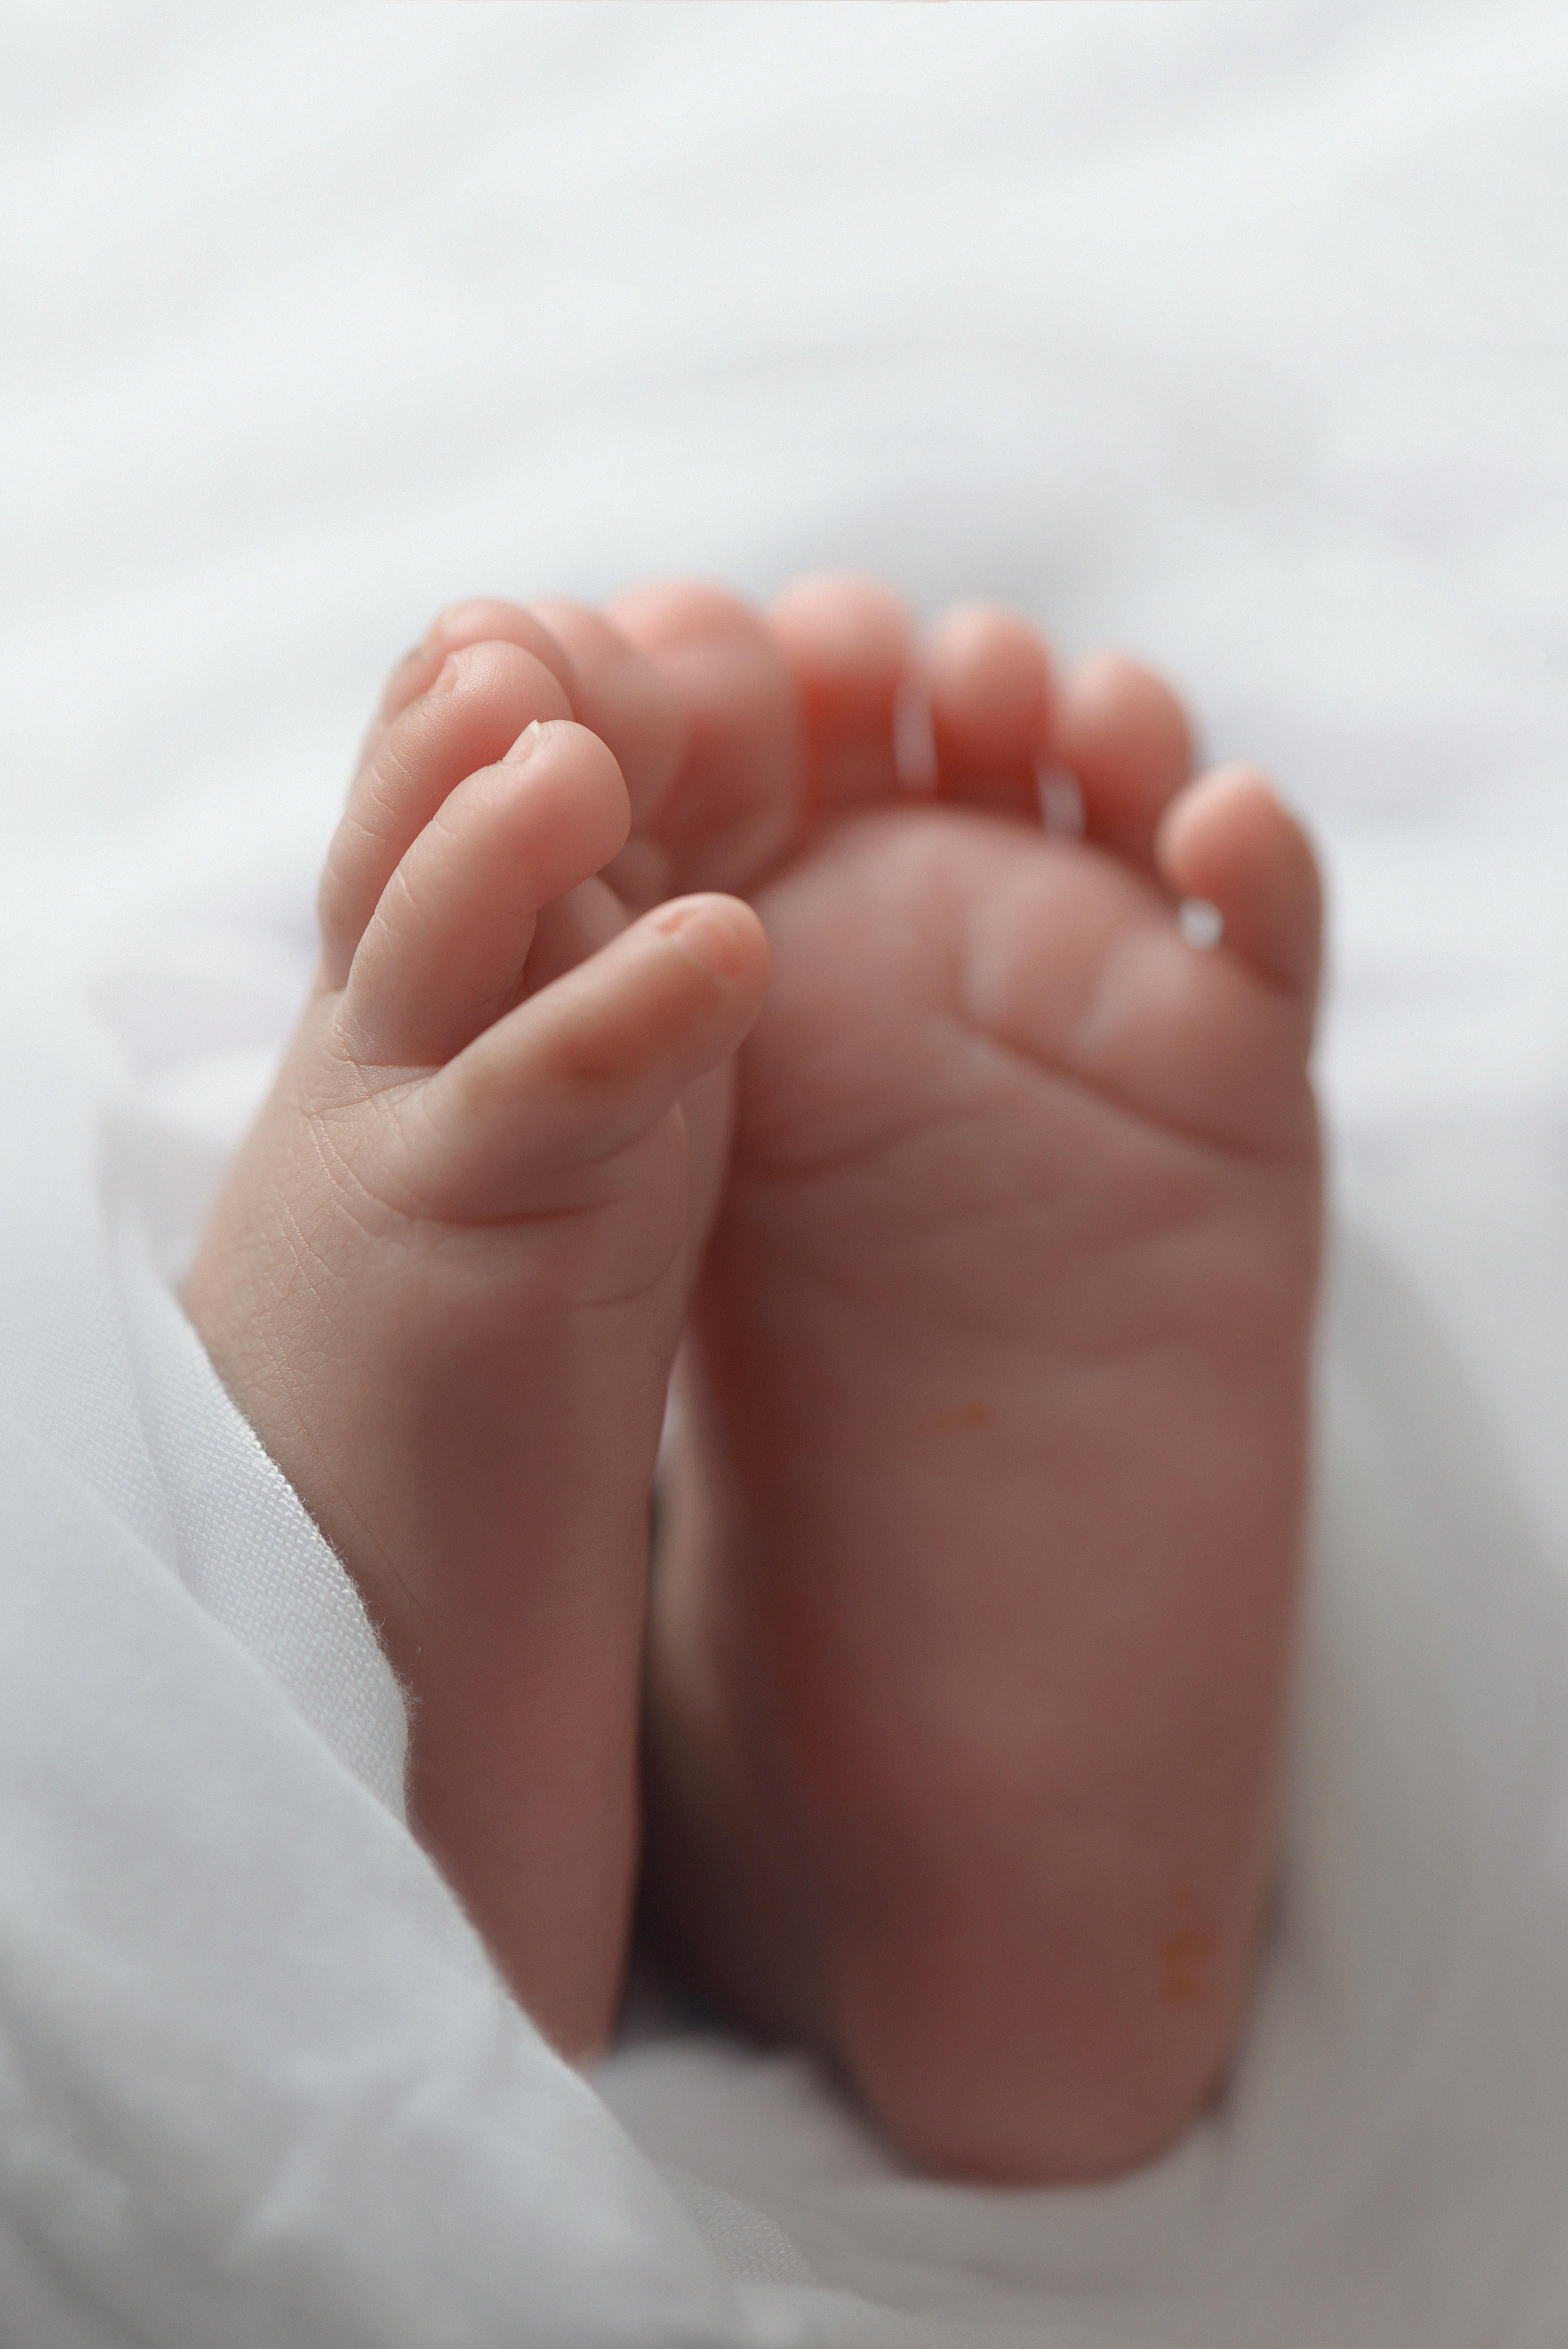 Free stock photo of baby, baby feet, baby toes